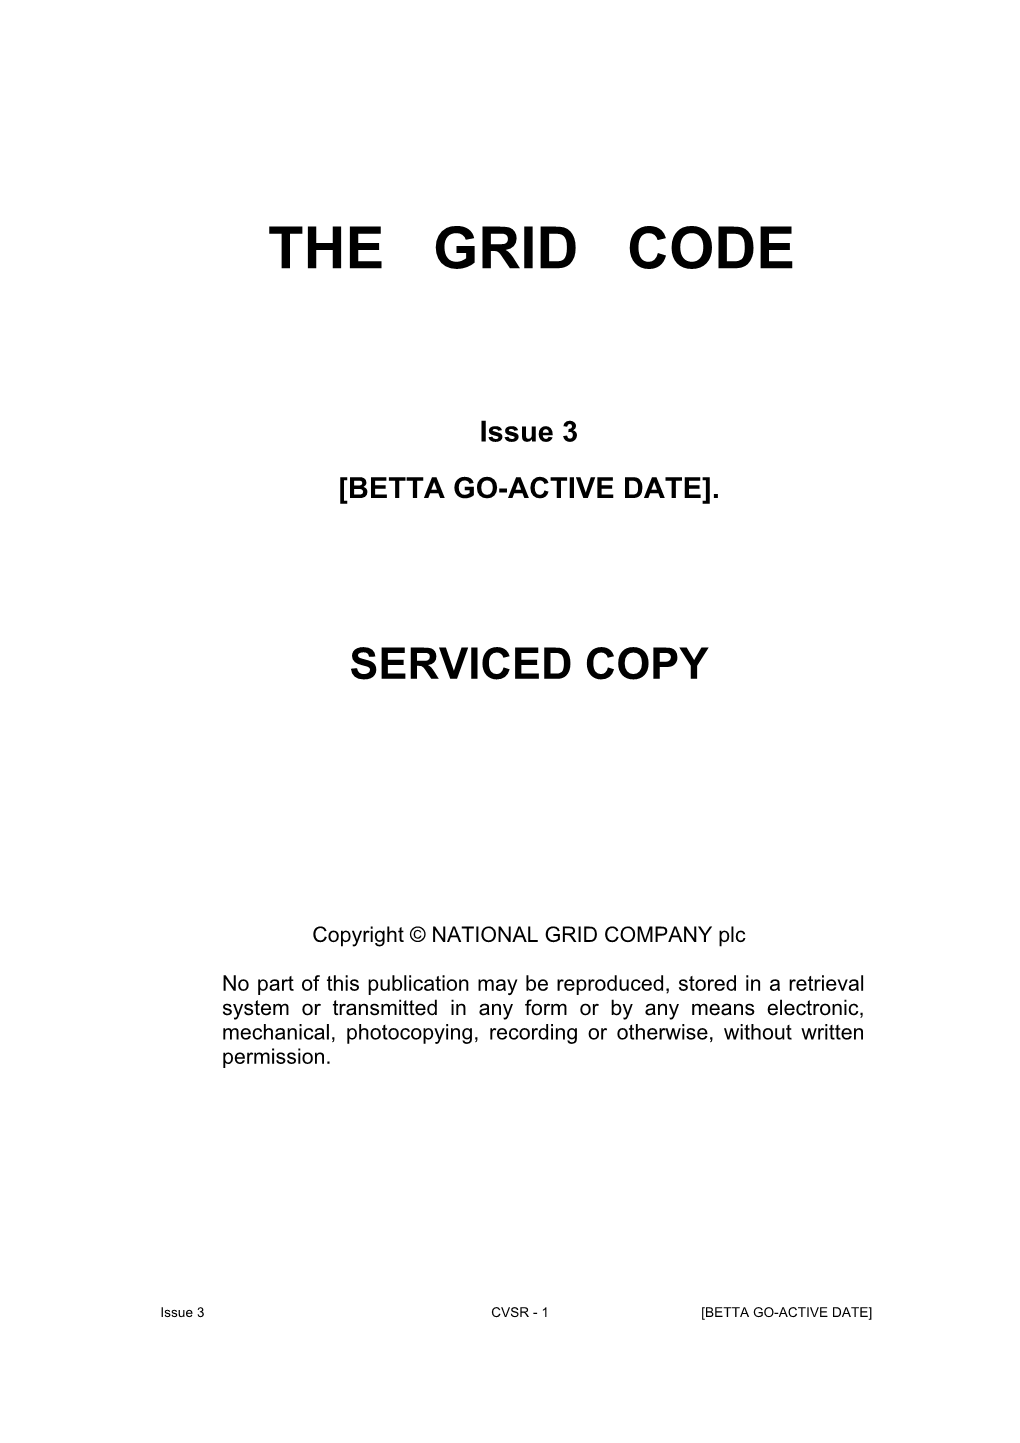 The Grid Code